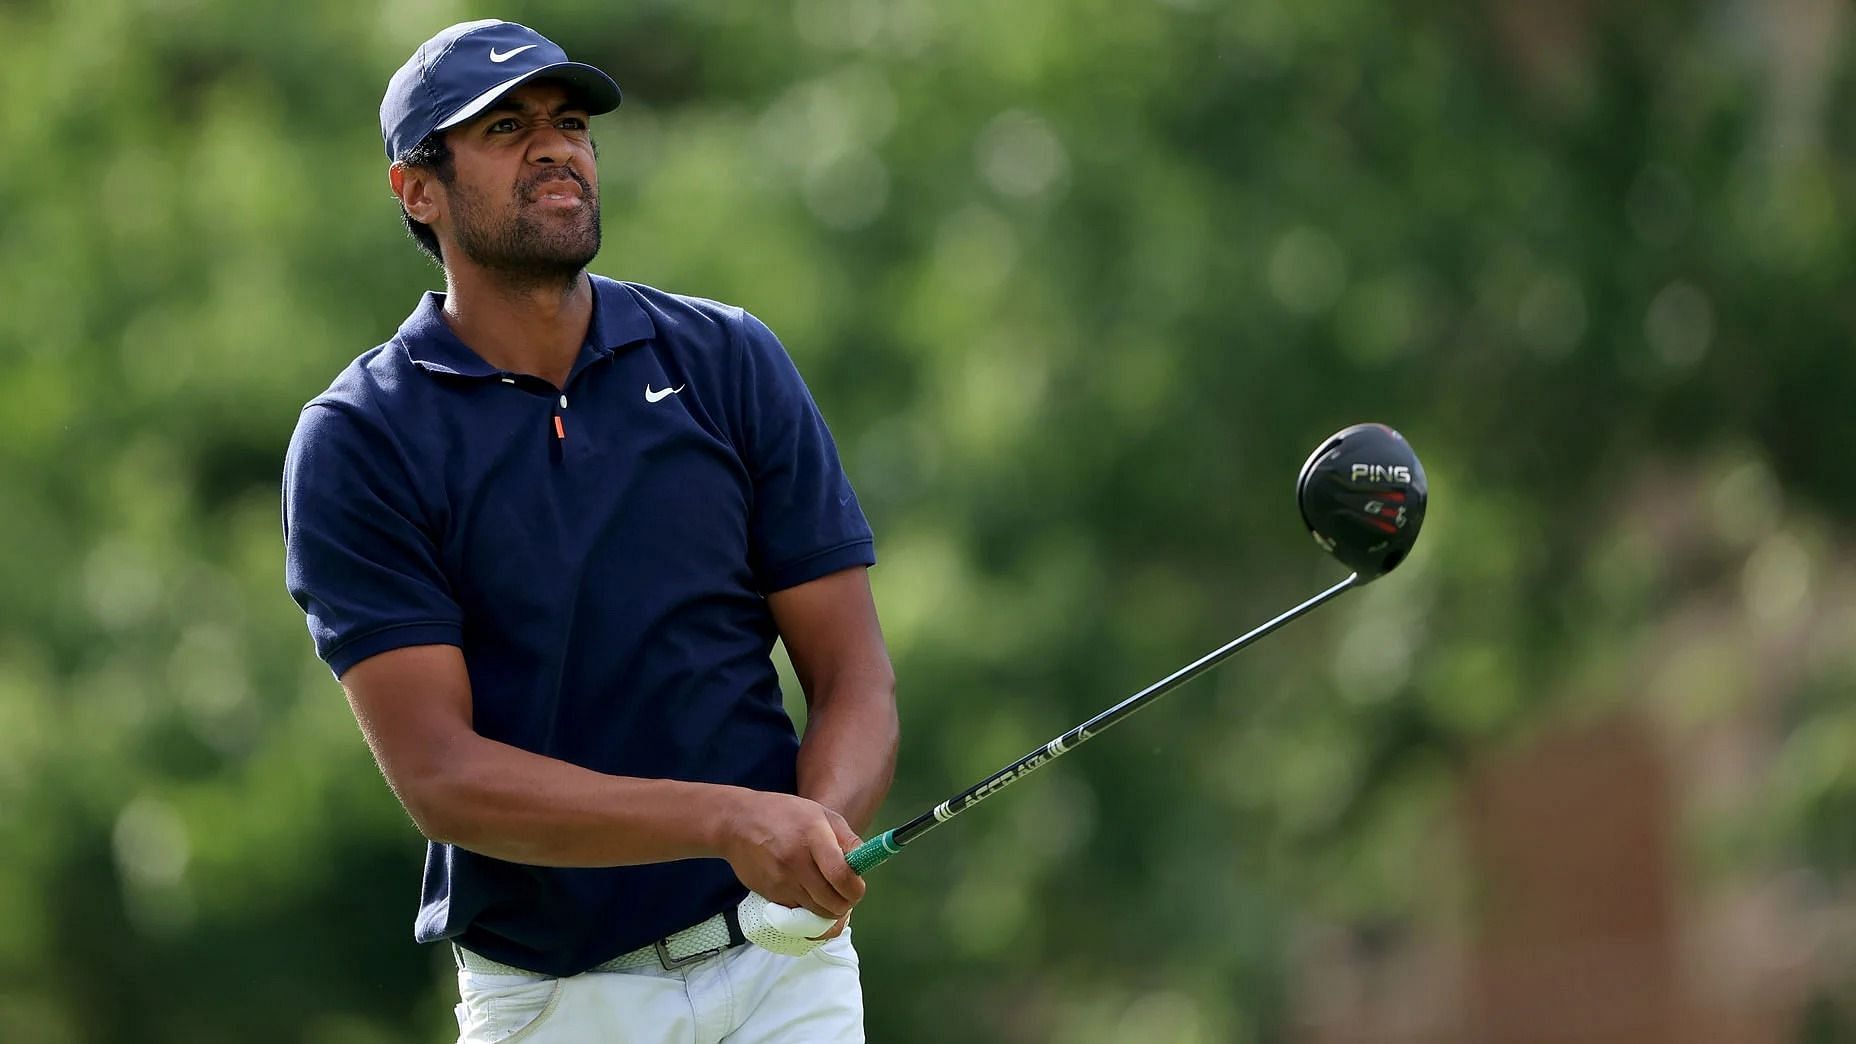 Tony Finau has stands at tied 13th after 3 rounds at Sentry TOC